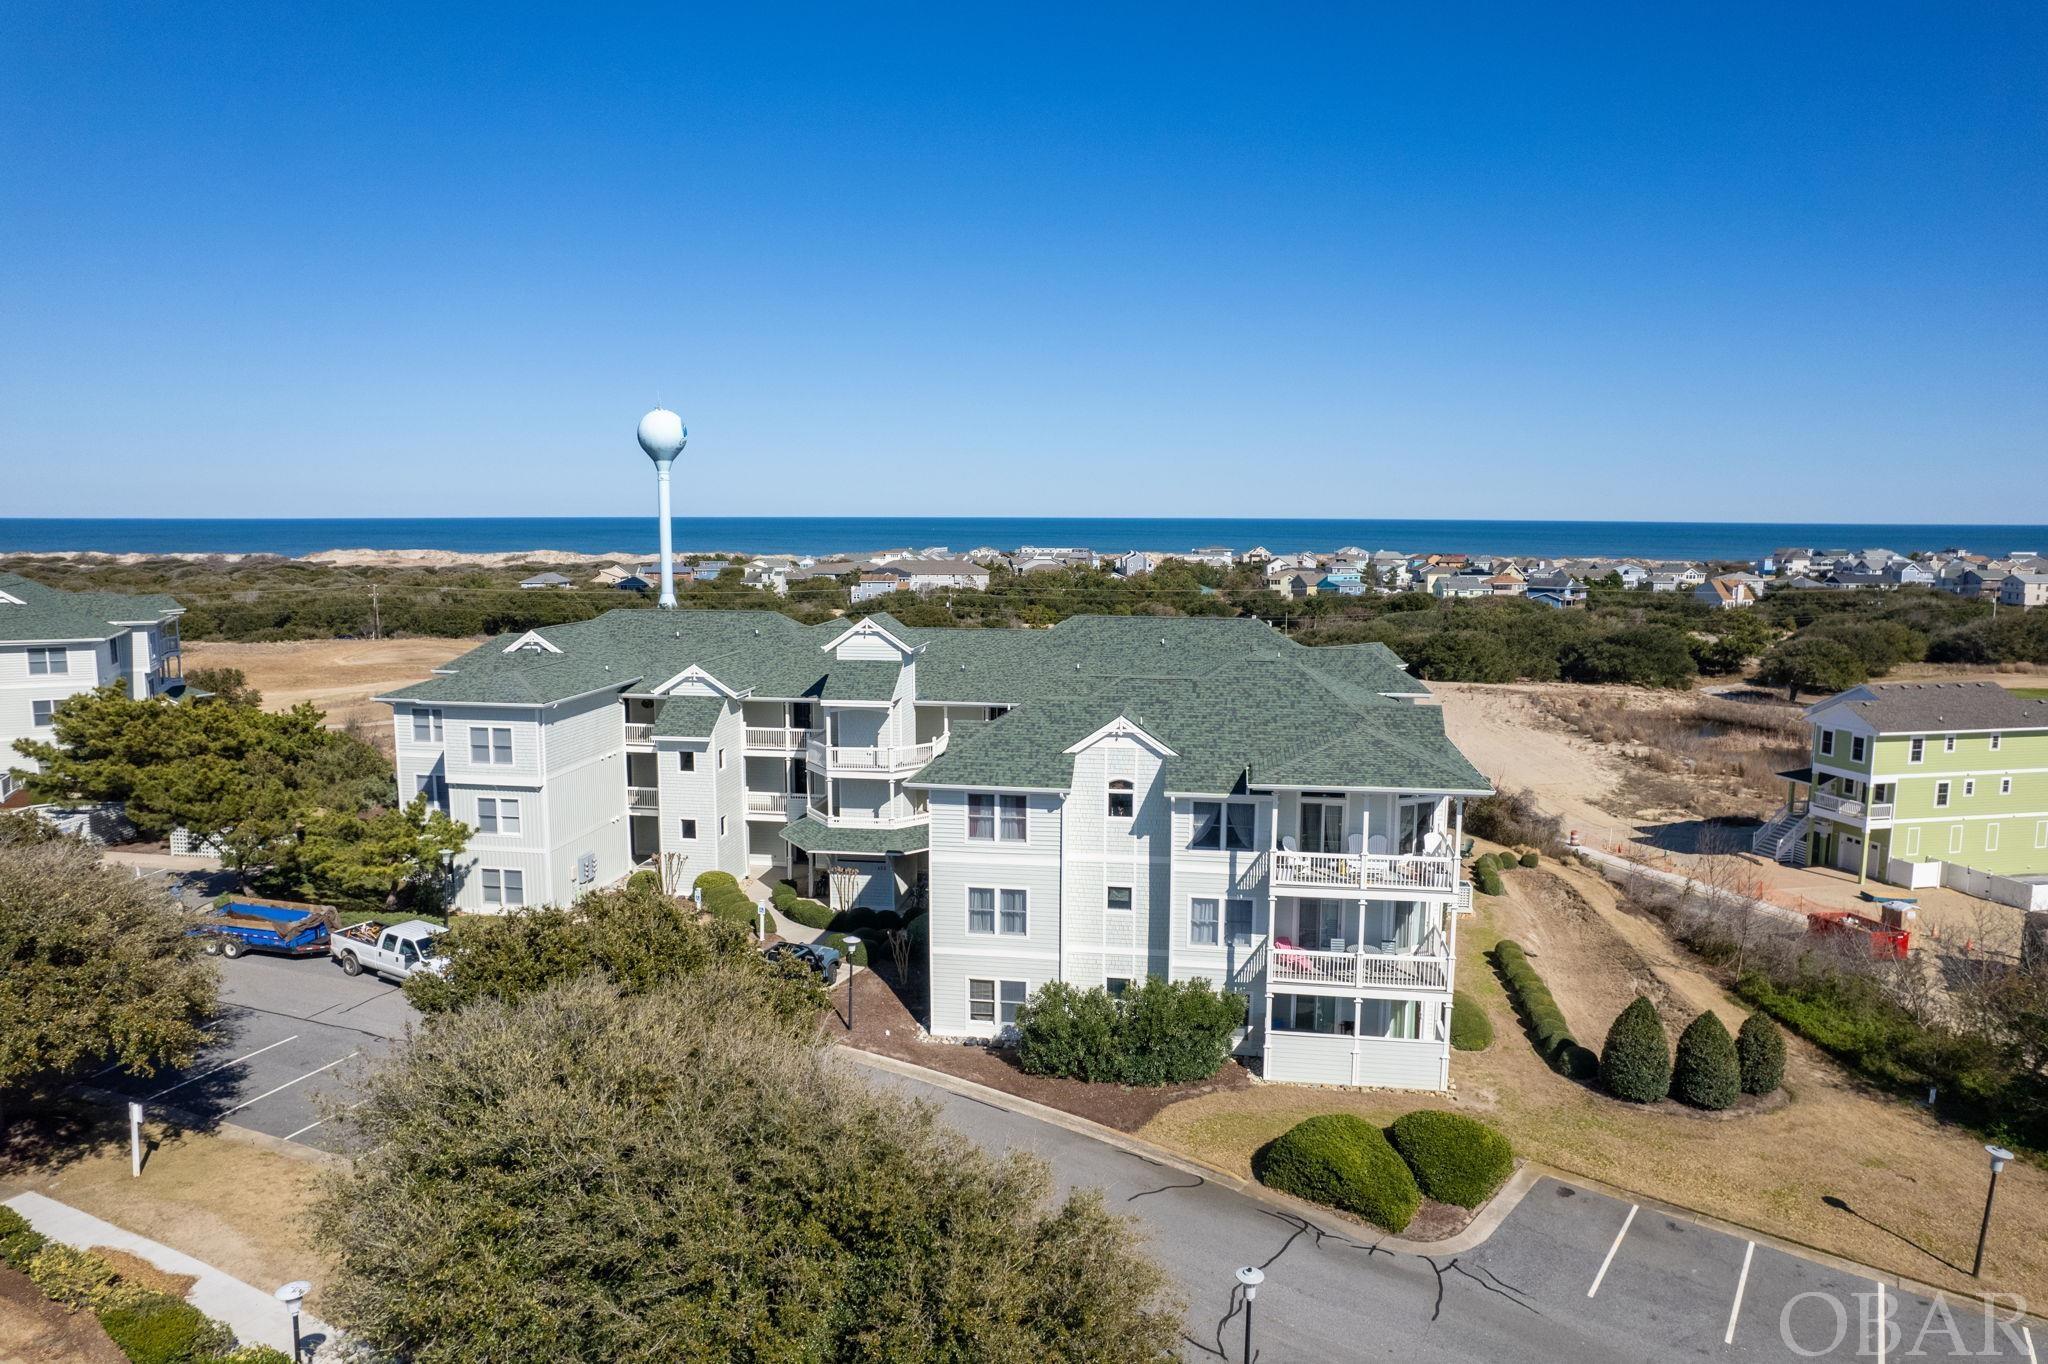 Pristine Villa perched atop one of the highest elevations in The Club. The beautifully maintained and spacious 2 bedroom corner unit home is located within the sought after community of Windswept Ridge Villas in the Currituck Club. Ample light pours in from 2 outdoor patios from this 2nd floor unit. "Postcard Perfect" is perfectly positioned to provide views of the beautiful blue waters of the Atlantic Ocean and vistas of the Rees Jones designed golf course.  The home offers updated living room furniture, curtains, flat screen tv's, décor, mattresses, bedding and interior paint within the last few years. 2018-2019 updated interior air handler (RA Hoy). 2022 dishwasher. 2024 New refrigerator with ice maker. With ample-sized bedrooms and an open floor plan, the home lives large! The amenity-rich community of the Currituck Club provides enhanced fun & entertainment: Clubhouse, several private community pools, tennis courts, fitness center, playground and beach trolley services! With elevator serving all levels of the building, this villa checks all the boxes! No detail overlooked in this impressive community and property. Recent updates to the building include: new roof in 2018, full exterior paint and siding repairs in 2023, and new gutters in 2023.